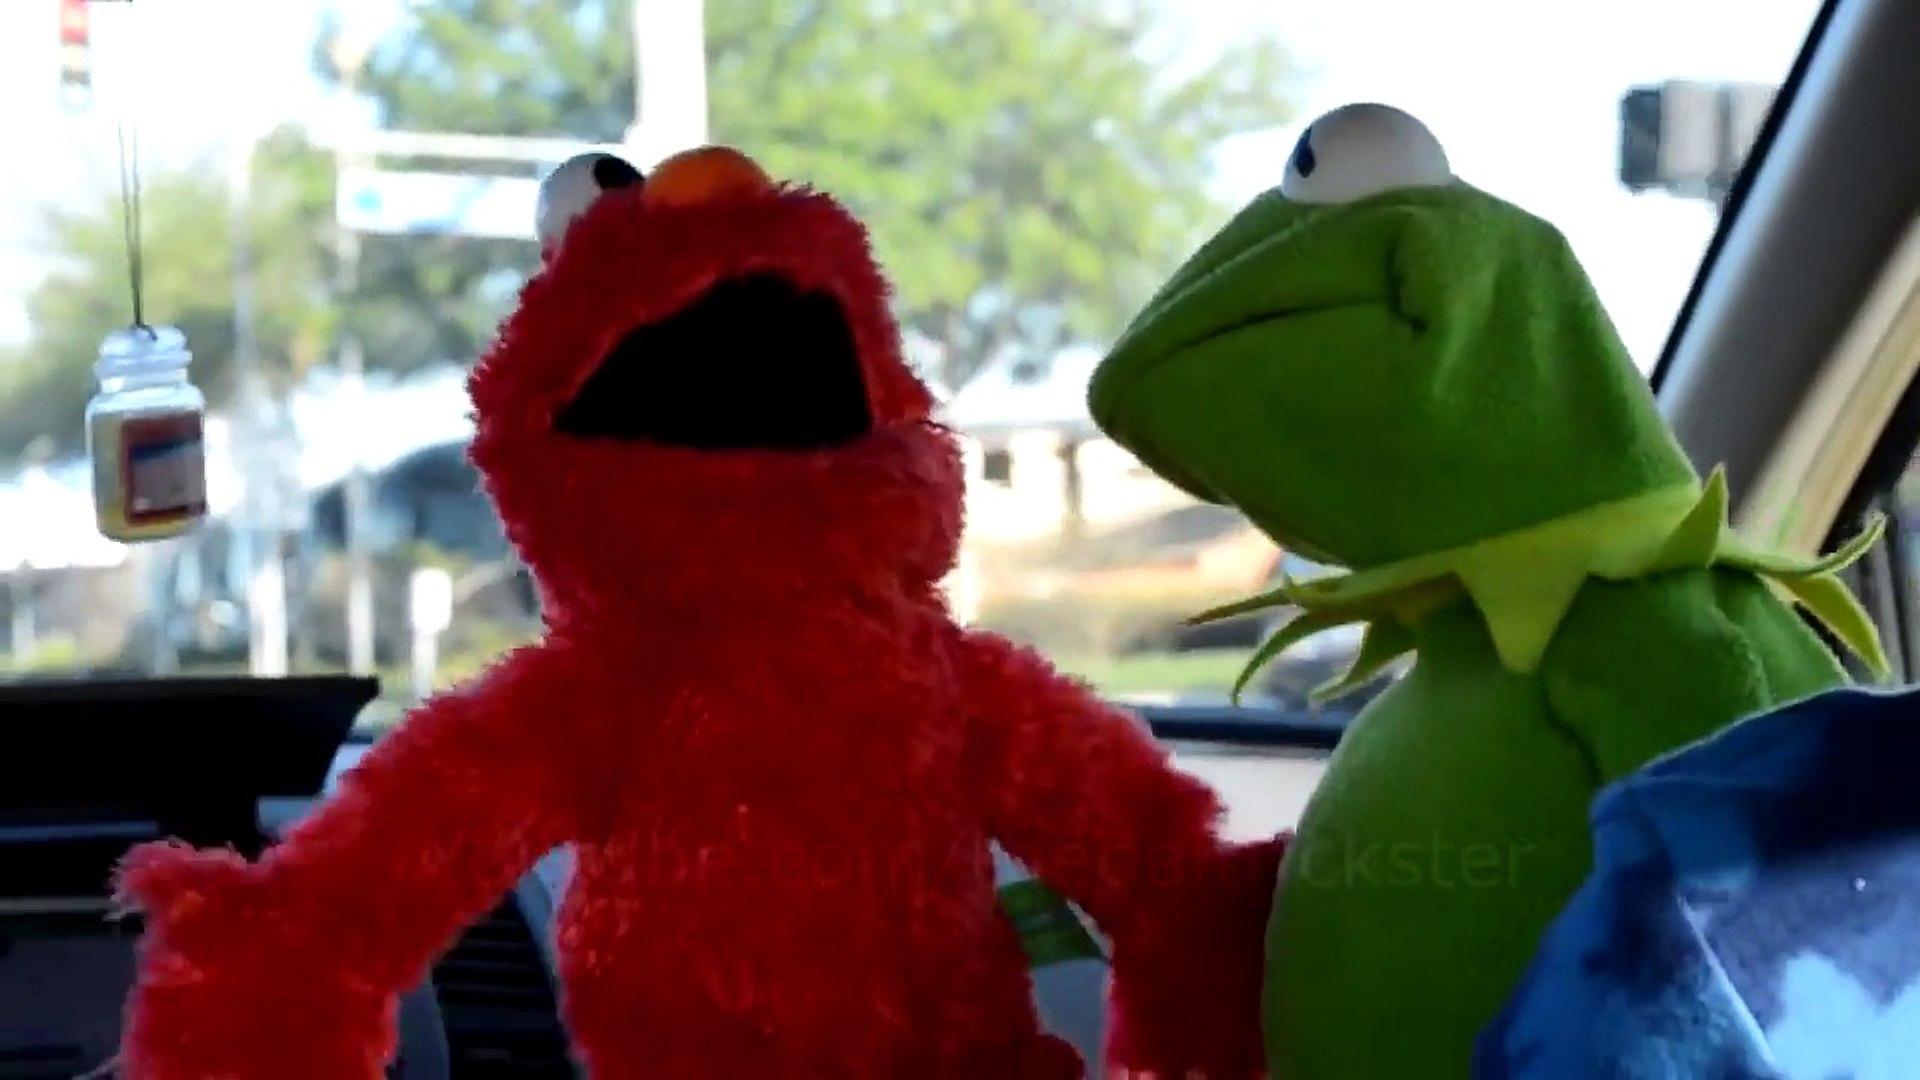 YOU LAUGH YOU LOSE! Elmo and Kermit The Frog Meme Compilation